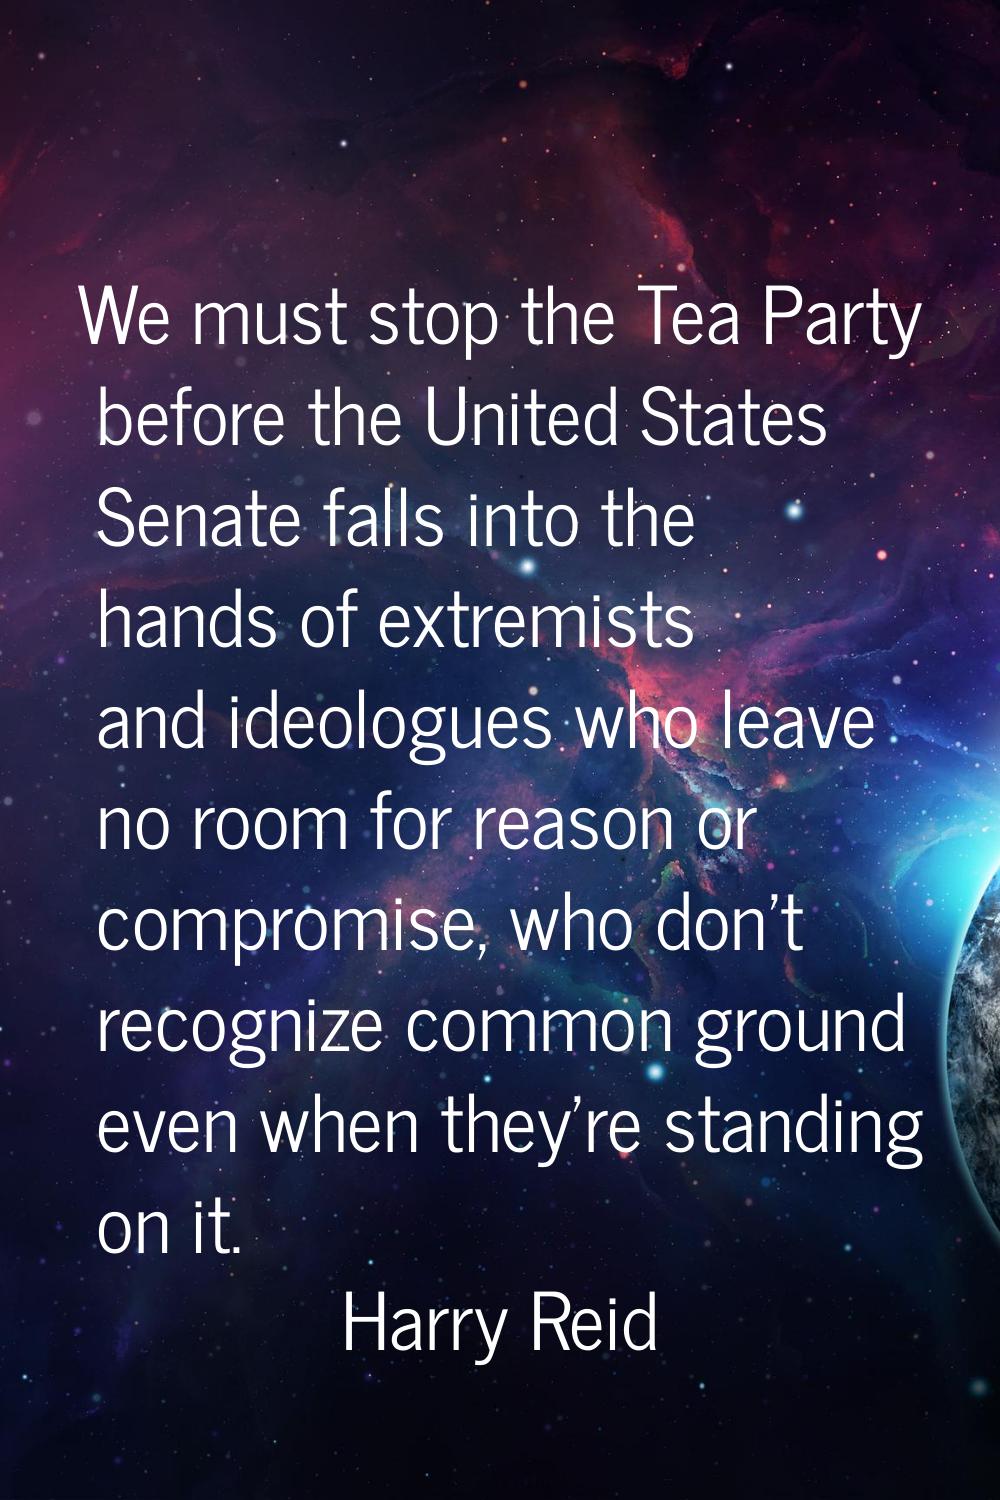 We must stop the Tea Party before the United States Senate falls into the hands of extremists and i